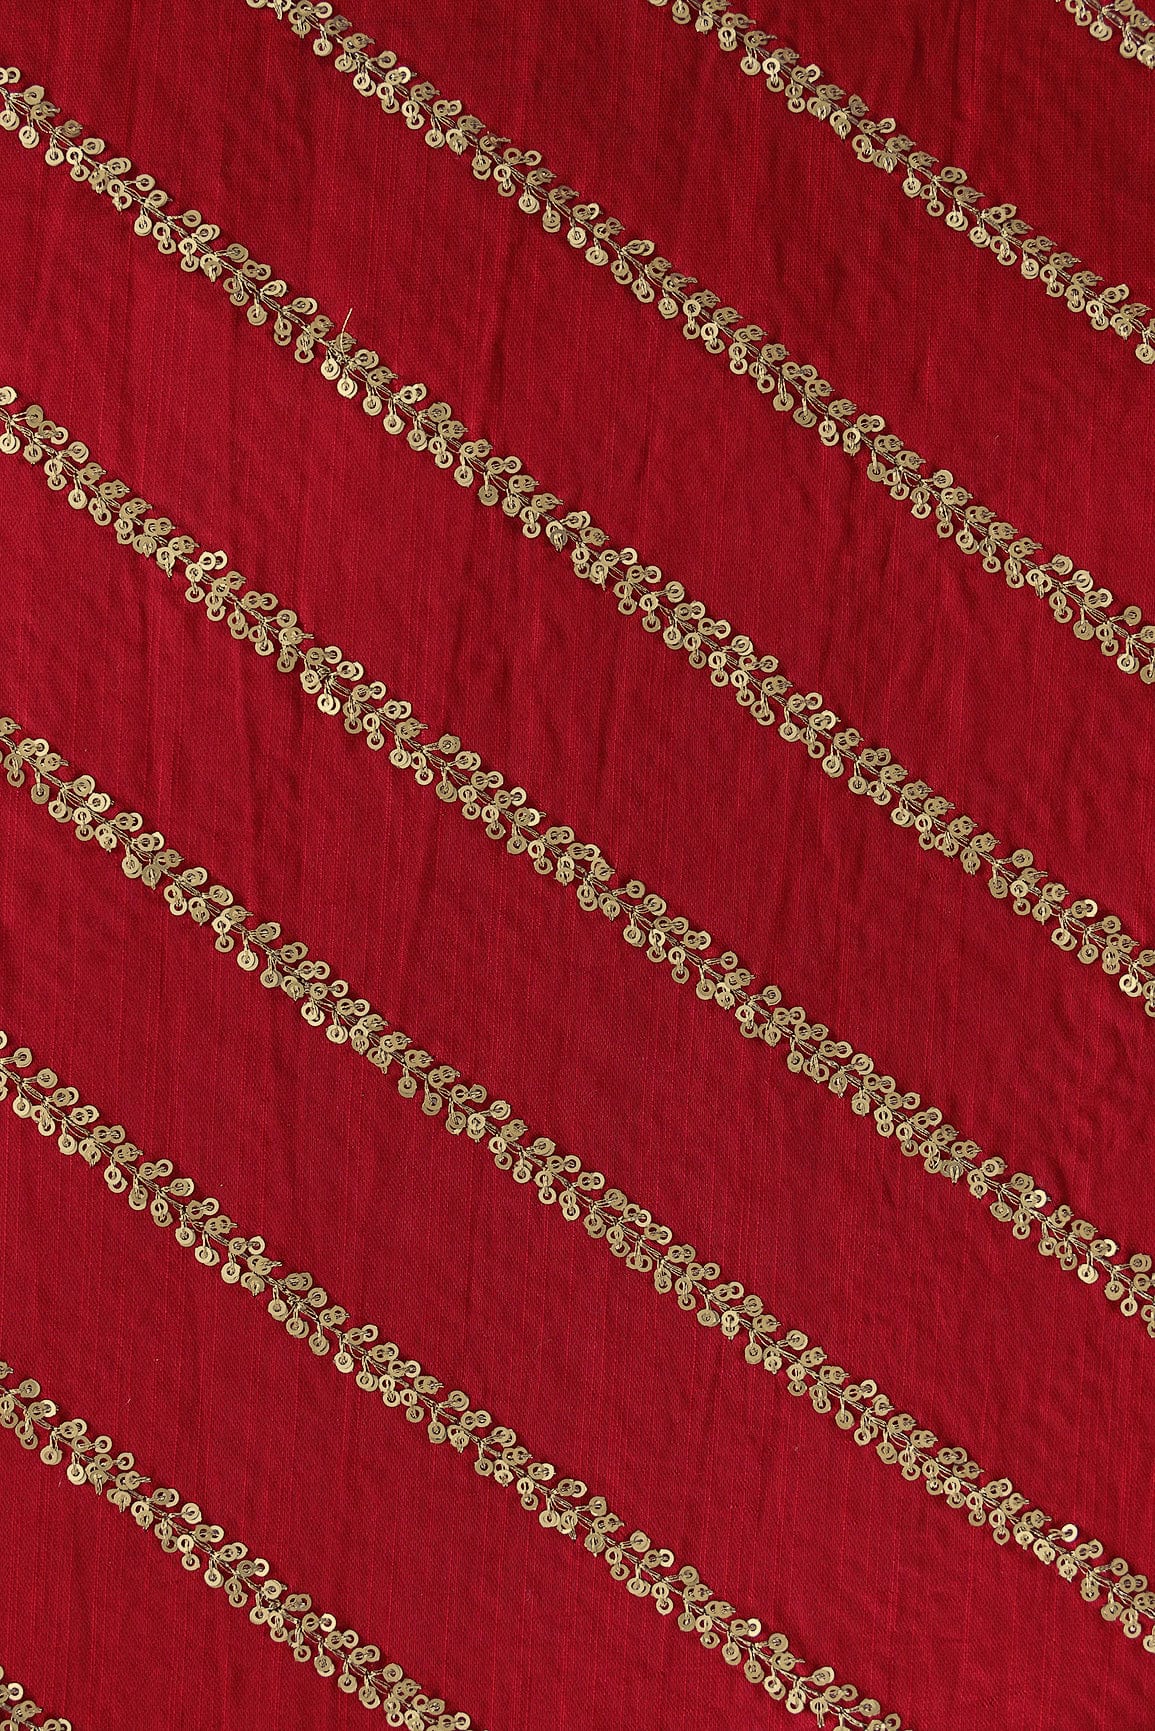 doeraa Embroidery Fabrics Gold Sequins With Gold Zari Stripes Embroidery Work On Maroon Raw Silk Fabric